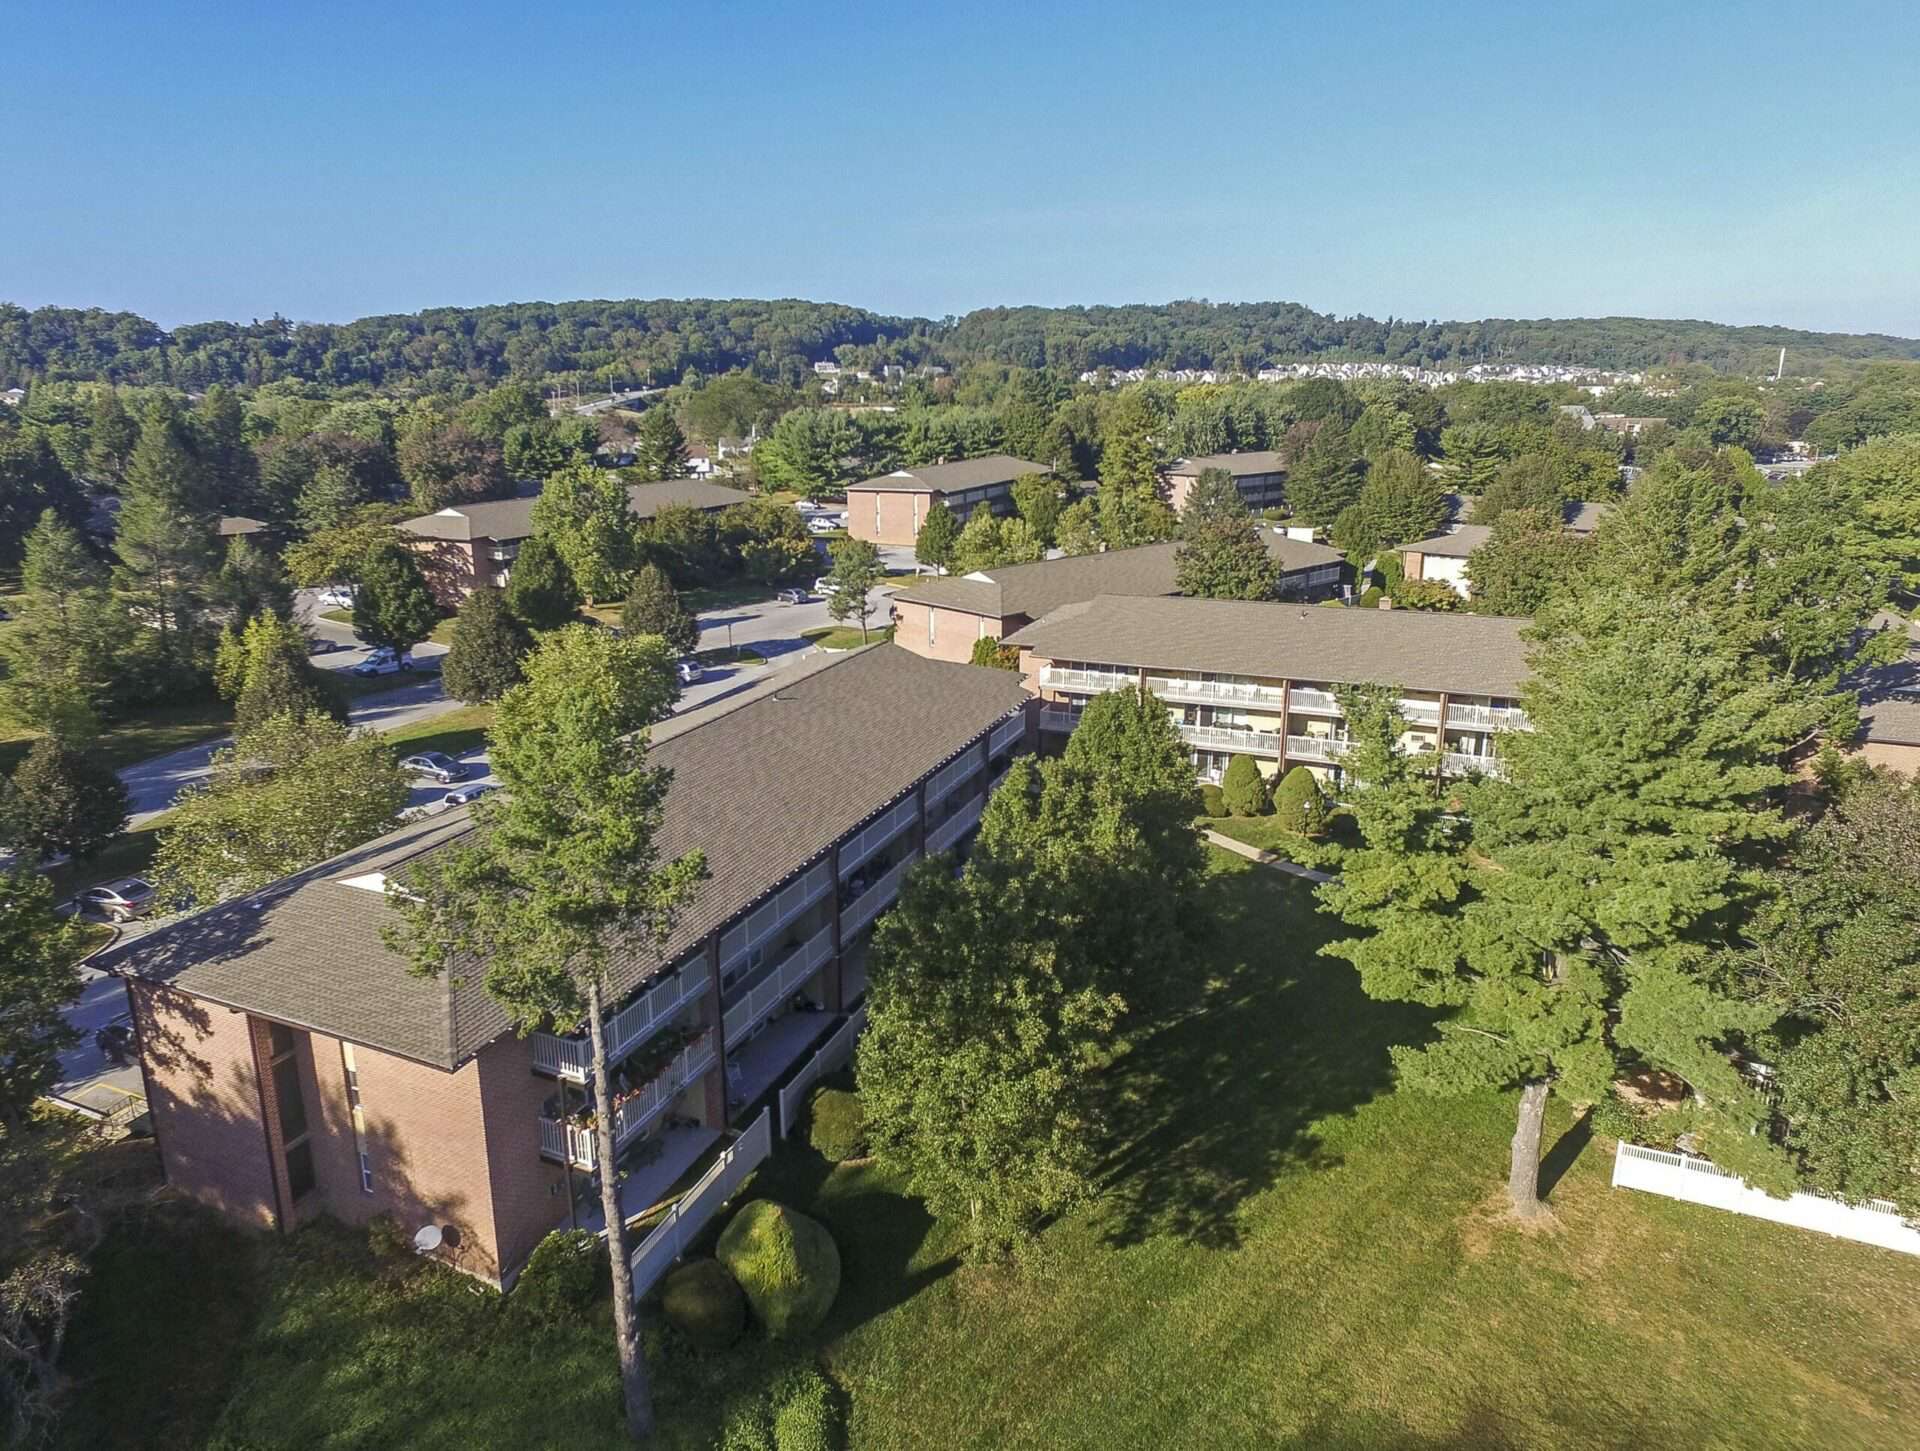 Exterior aerial view of apartments at Black Hawk apartments, fitted with a lawn, and tall trees